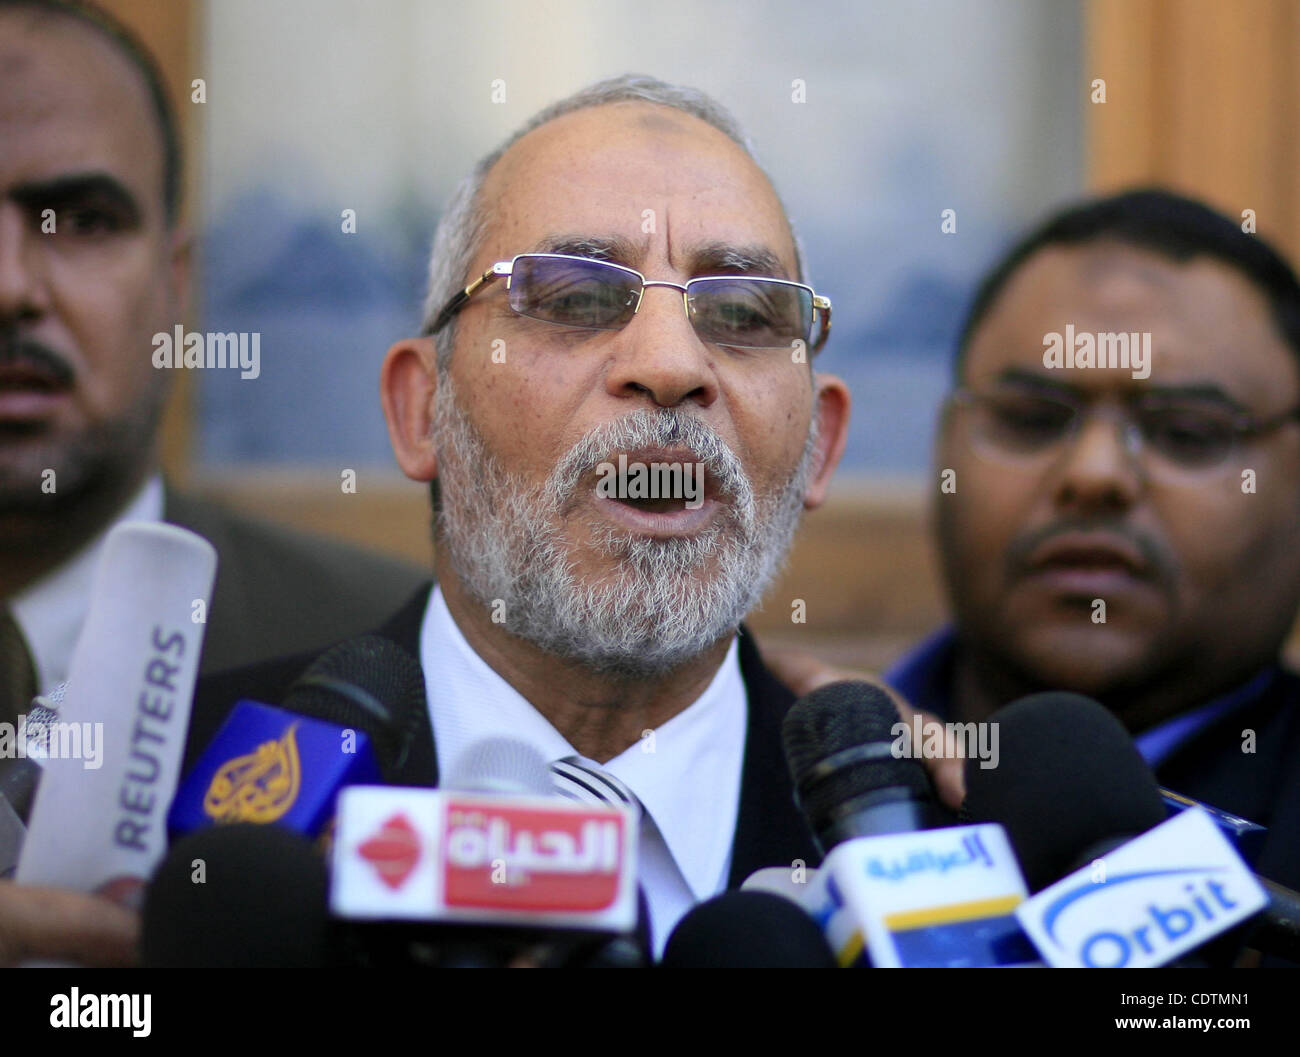 Mohammed Badie, the head of Egypt's Muslim Brotherhood speaks to the press outside a polling station Cairo after casting his vote on March 19, 2011 as voters got their first taste of democracy in a referendum to a package of constitutional changes after president Hosni Mubarak was forced to relinqui Stock Photo